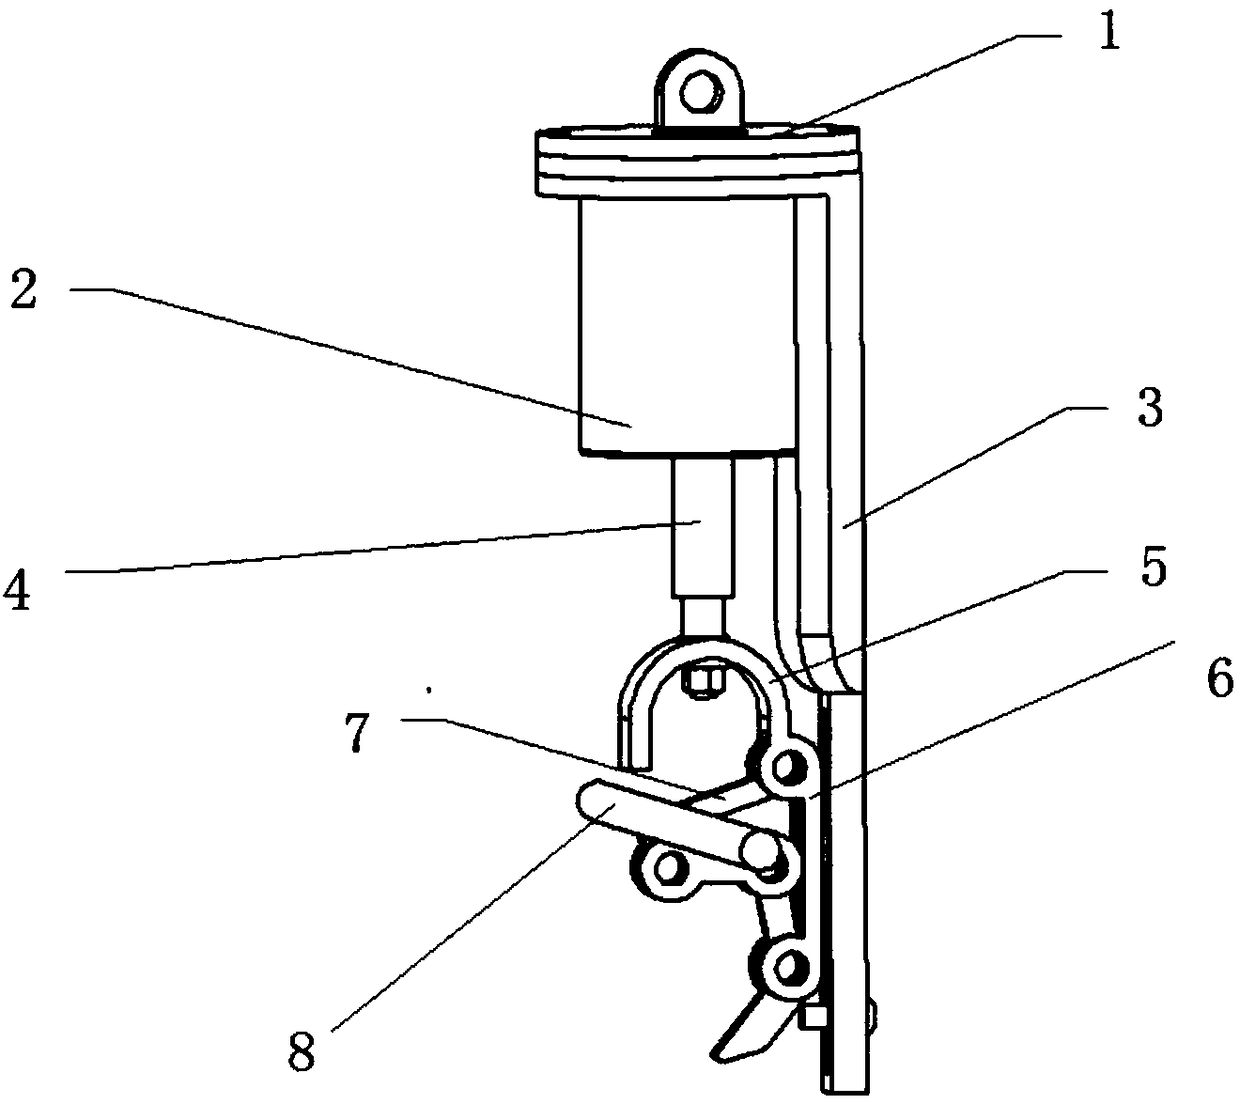 Line-releasing and rod-protecting apparatus of power transmission line tower structure